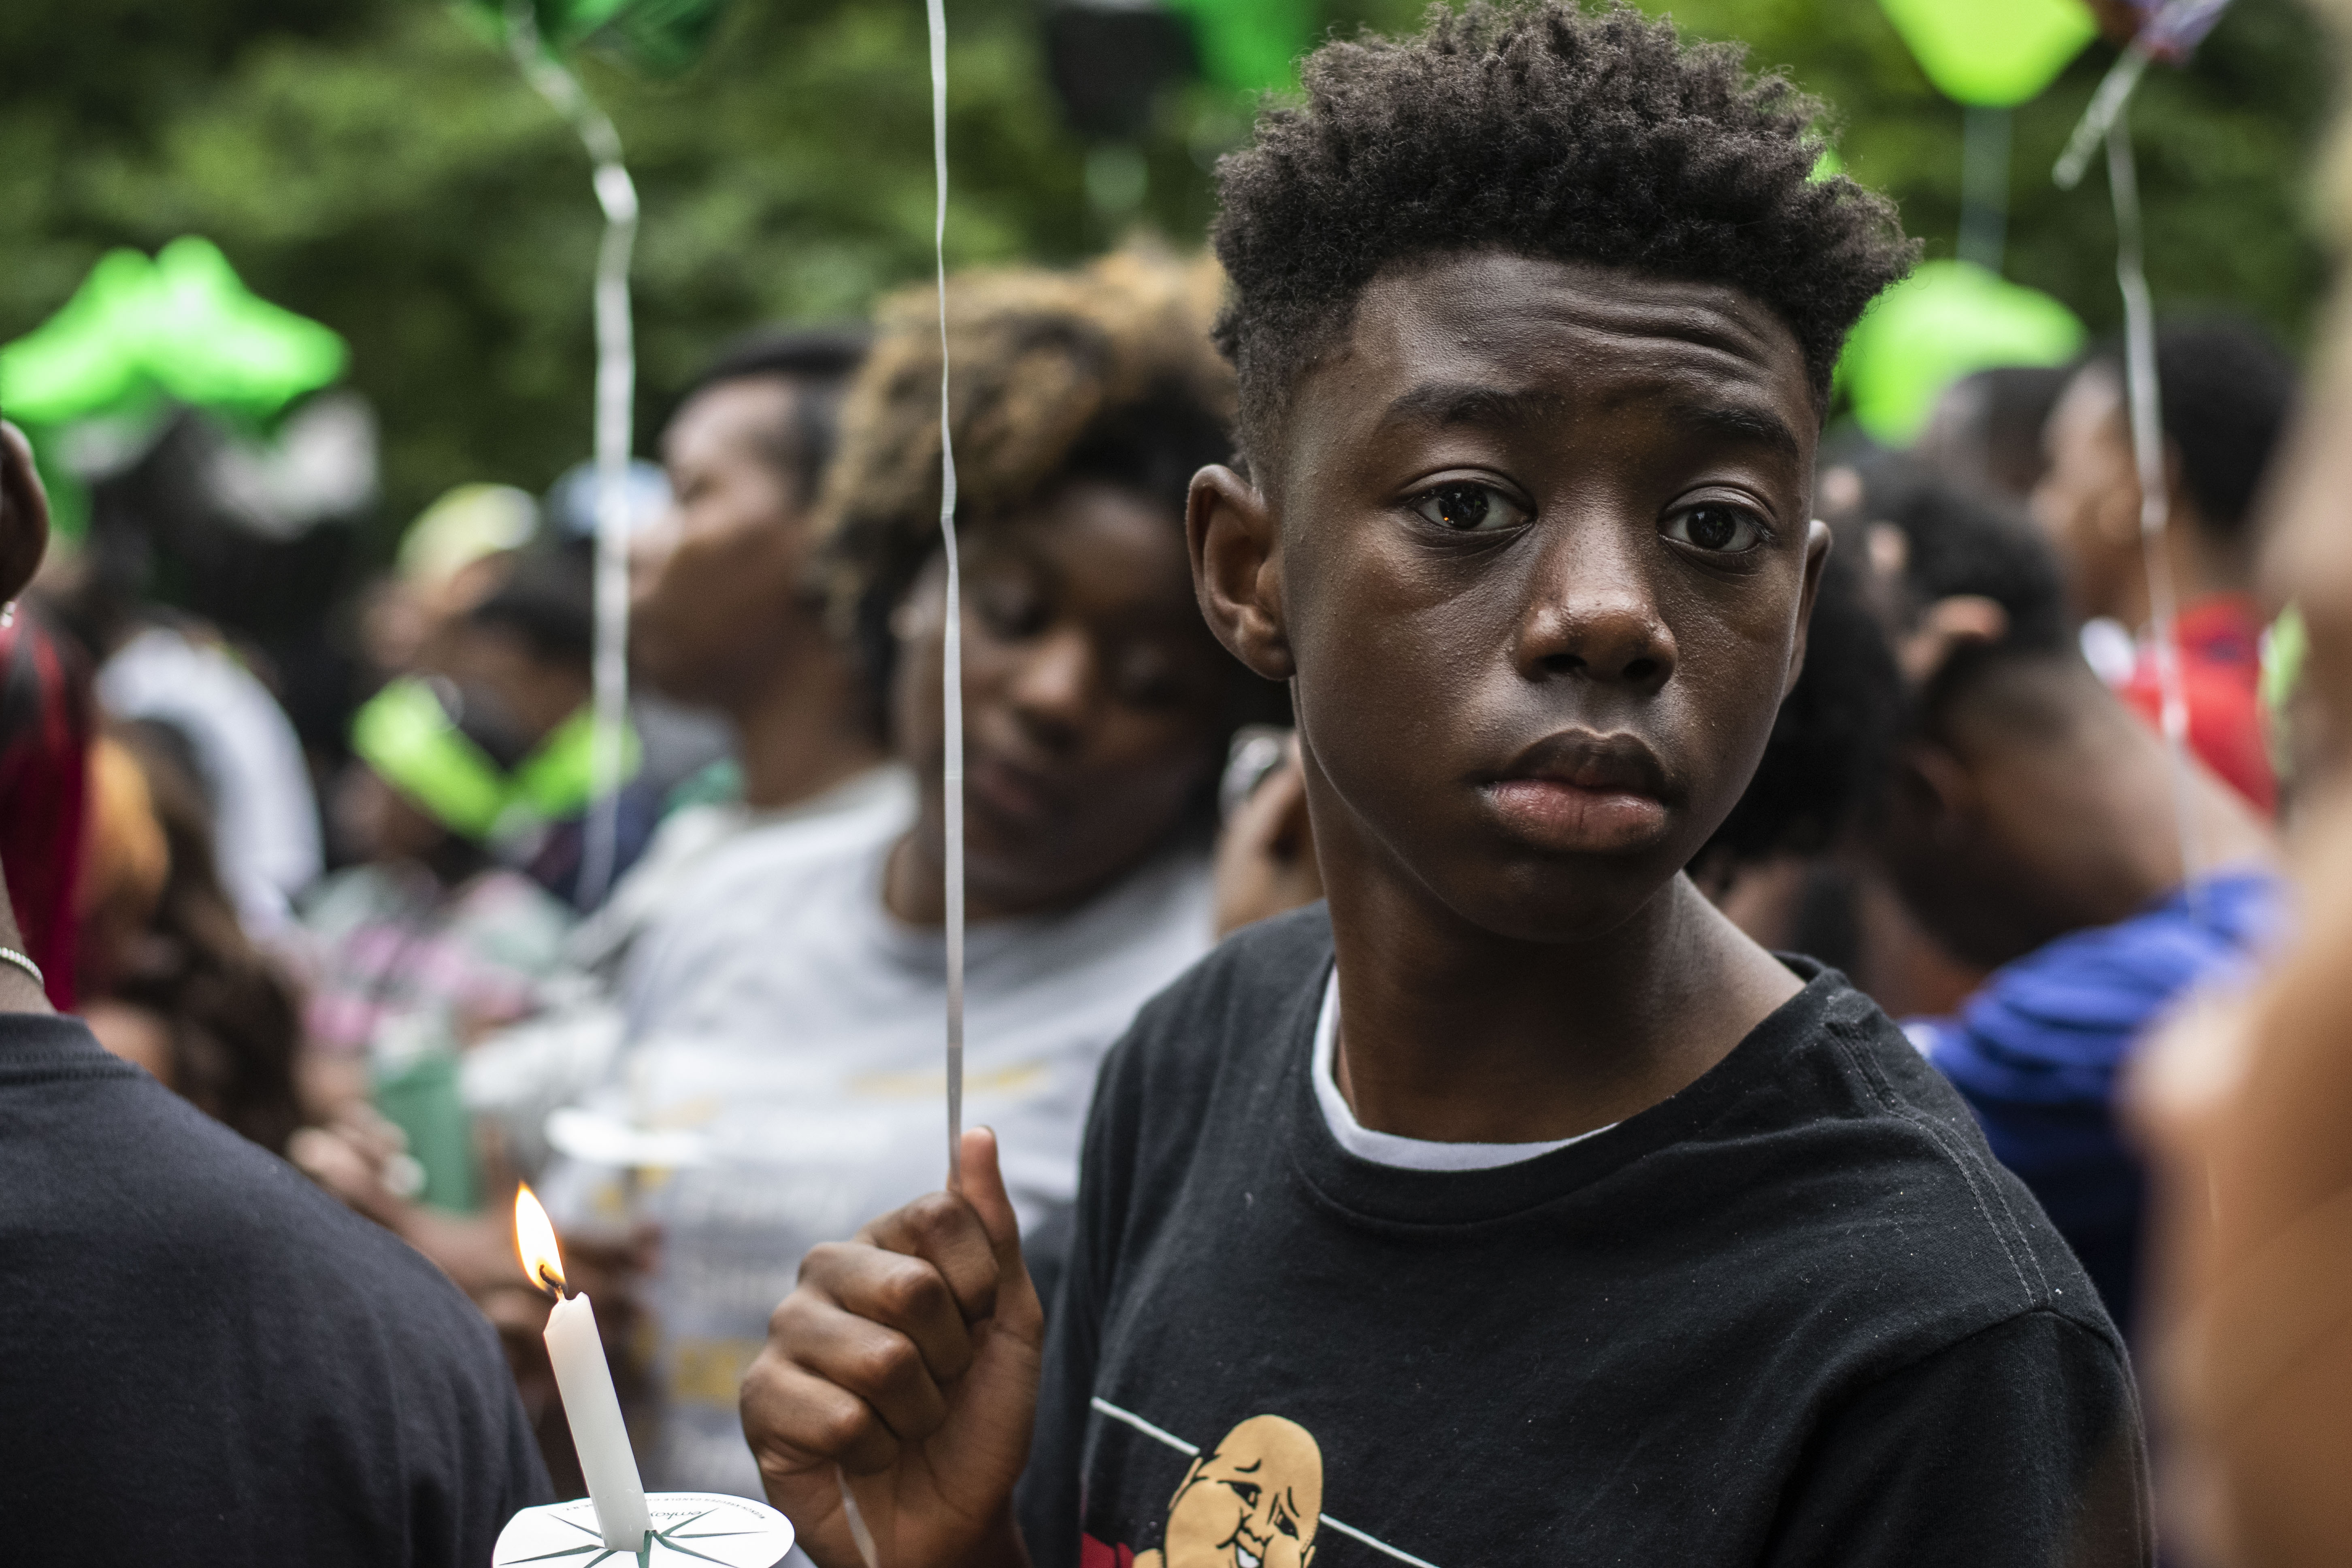 A vigil for Brandon Webber, who was shot by U.S. Marshals in Frayser, drew a crowd carrying candles and balloons last Friday evening (June 14). (Photo: Johnathan Martin)